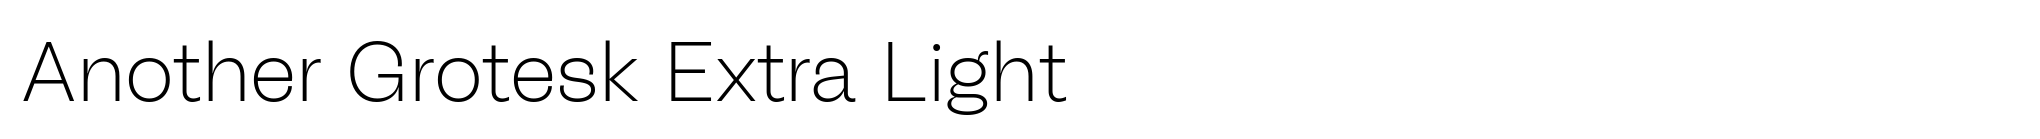 Another Grotesk Extra Light image